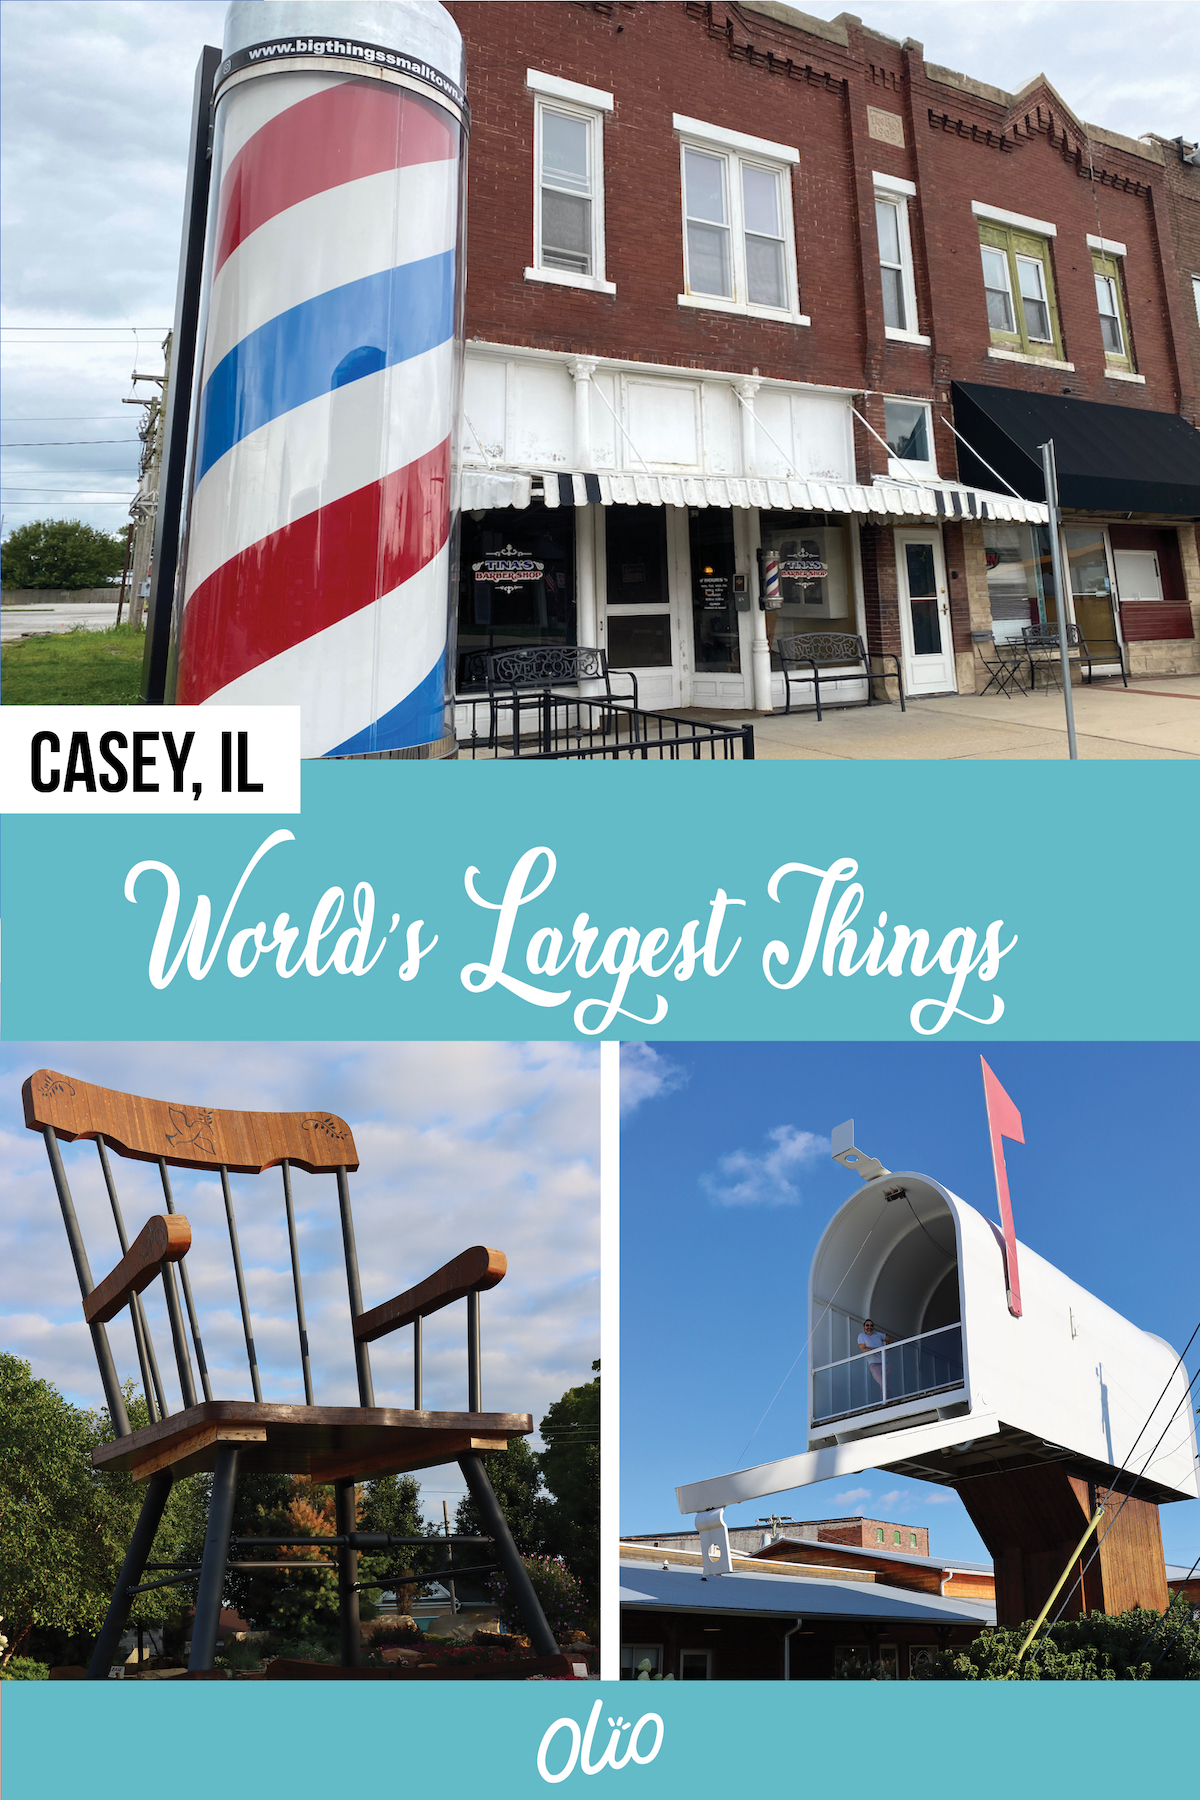 Have you heard of all the world's largest things in Casey, Illinois? This small southern Illinois town has 12 Guinness World Records and dozens of other big attractions. Plan your larger-than-life road trip to experience all of this small town fun alongside some of the best roadside attractions in the Midwest.